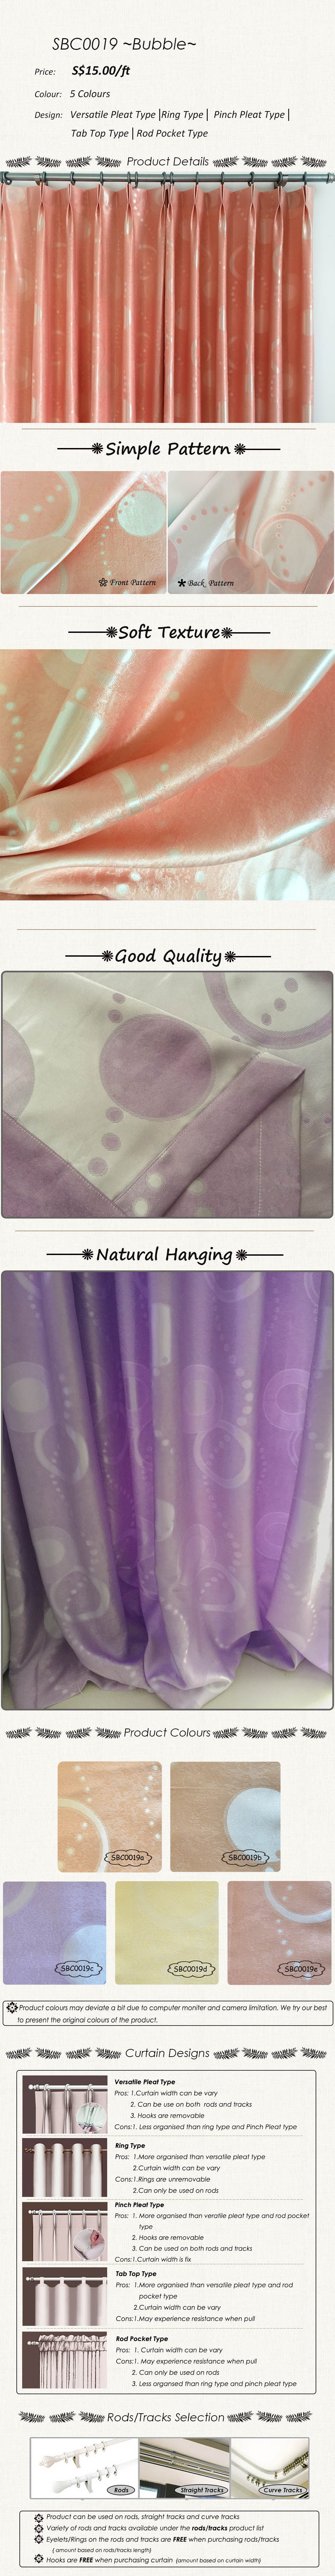 Ming's Living, Curtain Singapore, blackout curtain Singapore, curtain tracks and rods